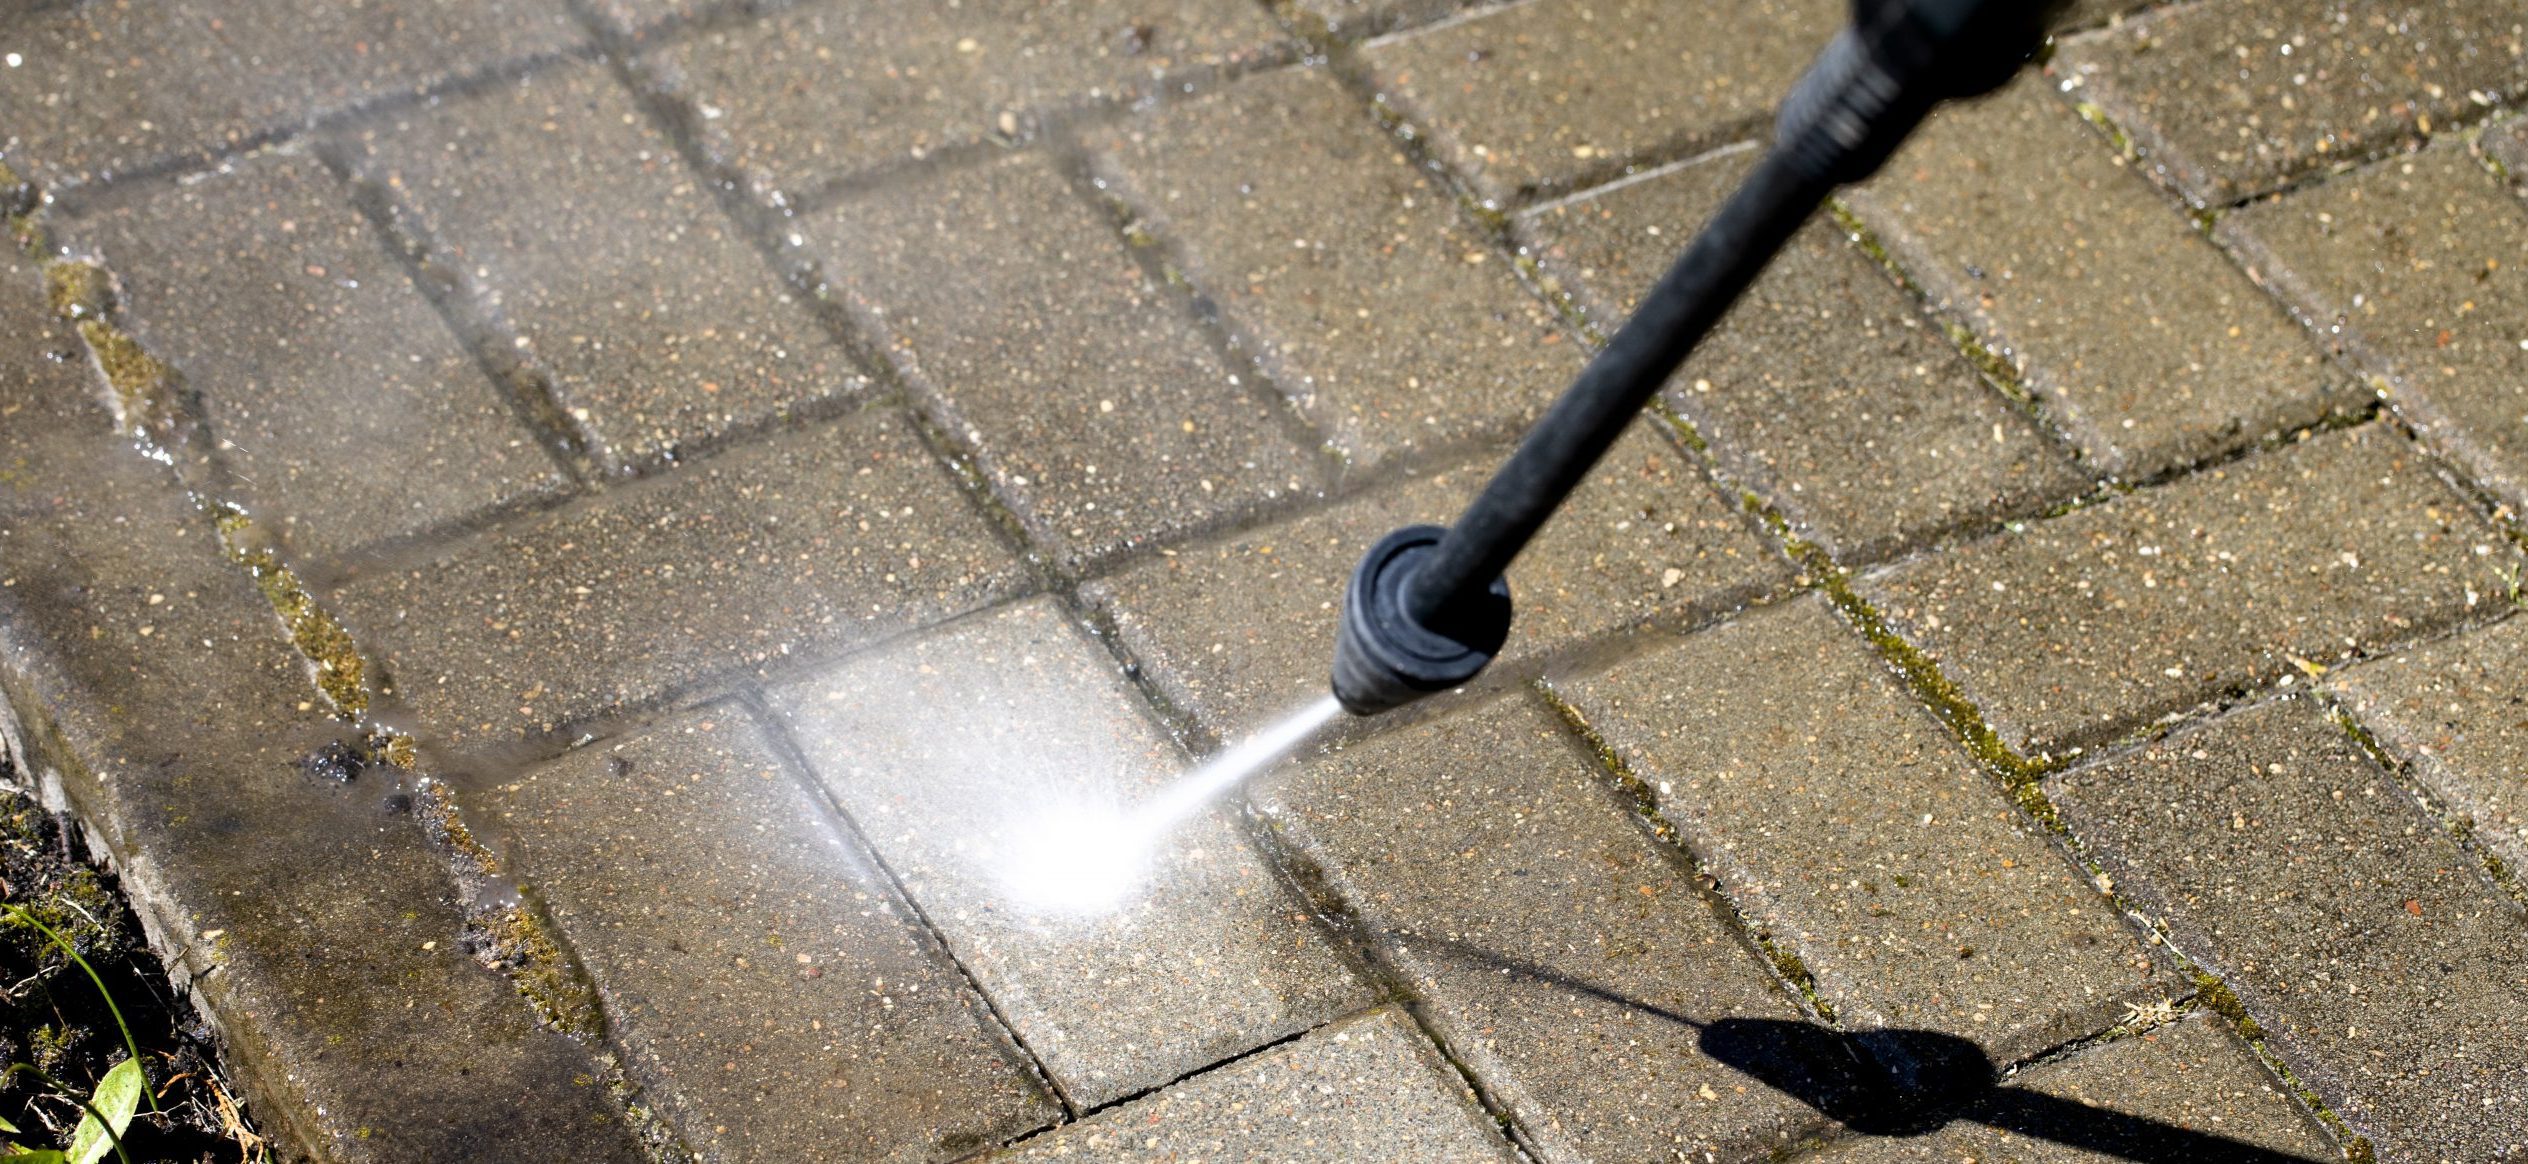 high-pressure washer cleans with jet of water concrete stones